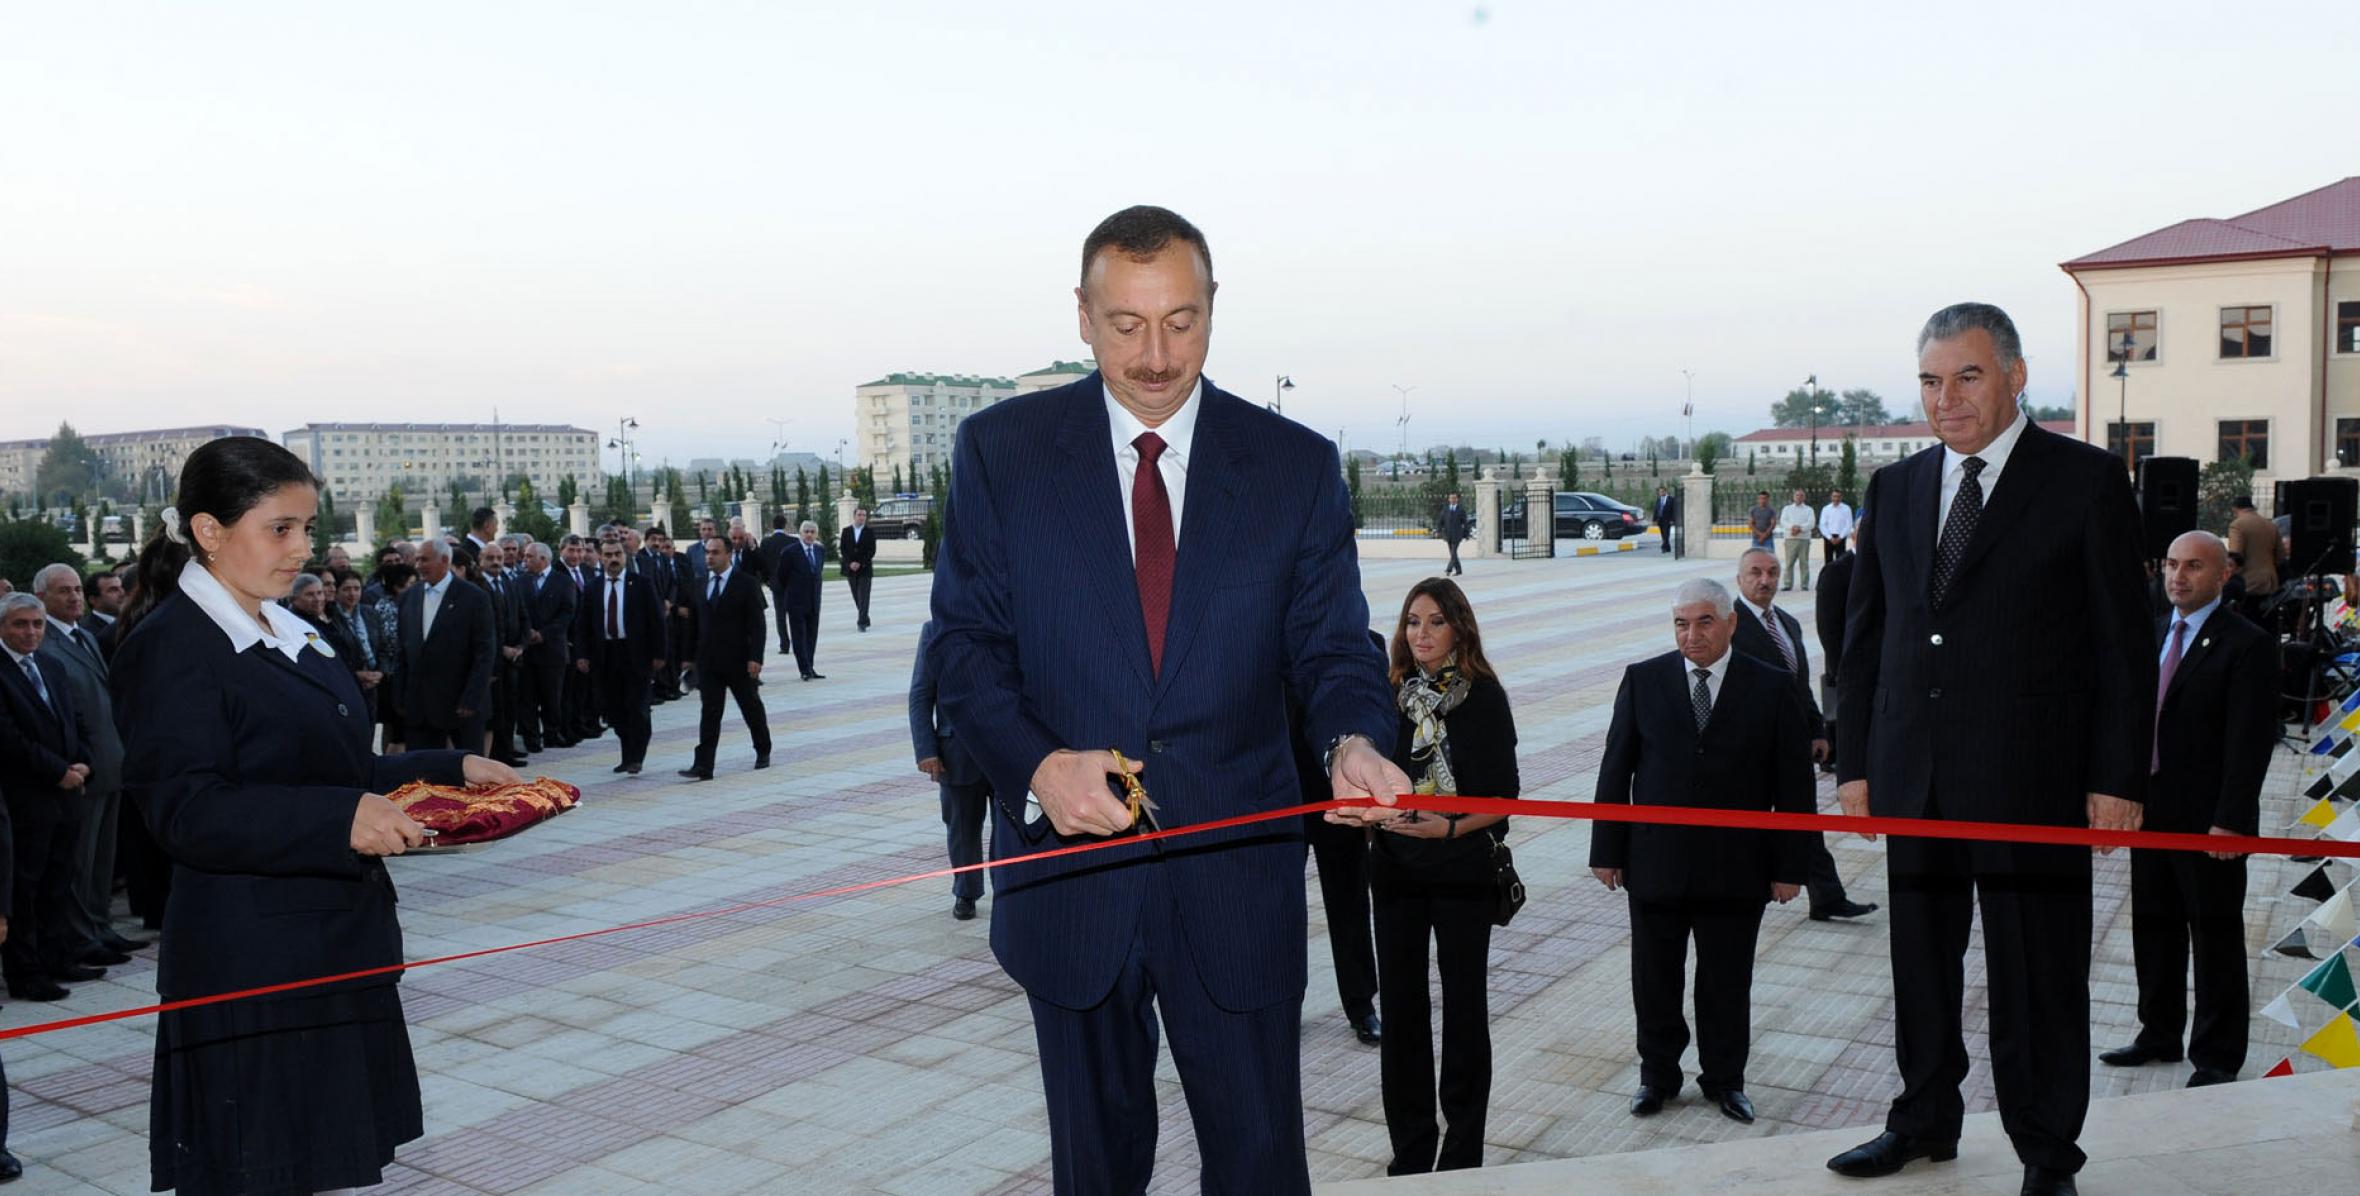 Ilham Aliyev participated at the opening of mansion houses constructed for IDP families in Yevlakh